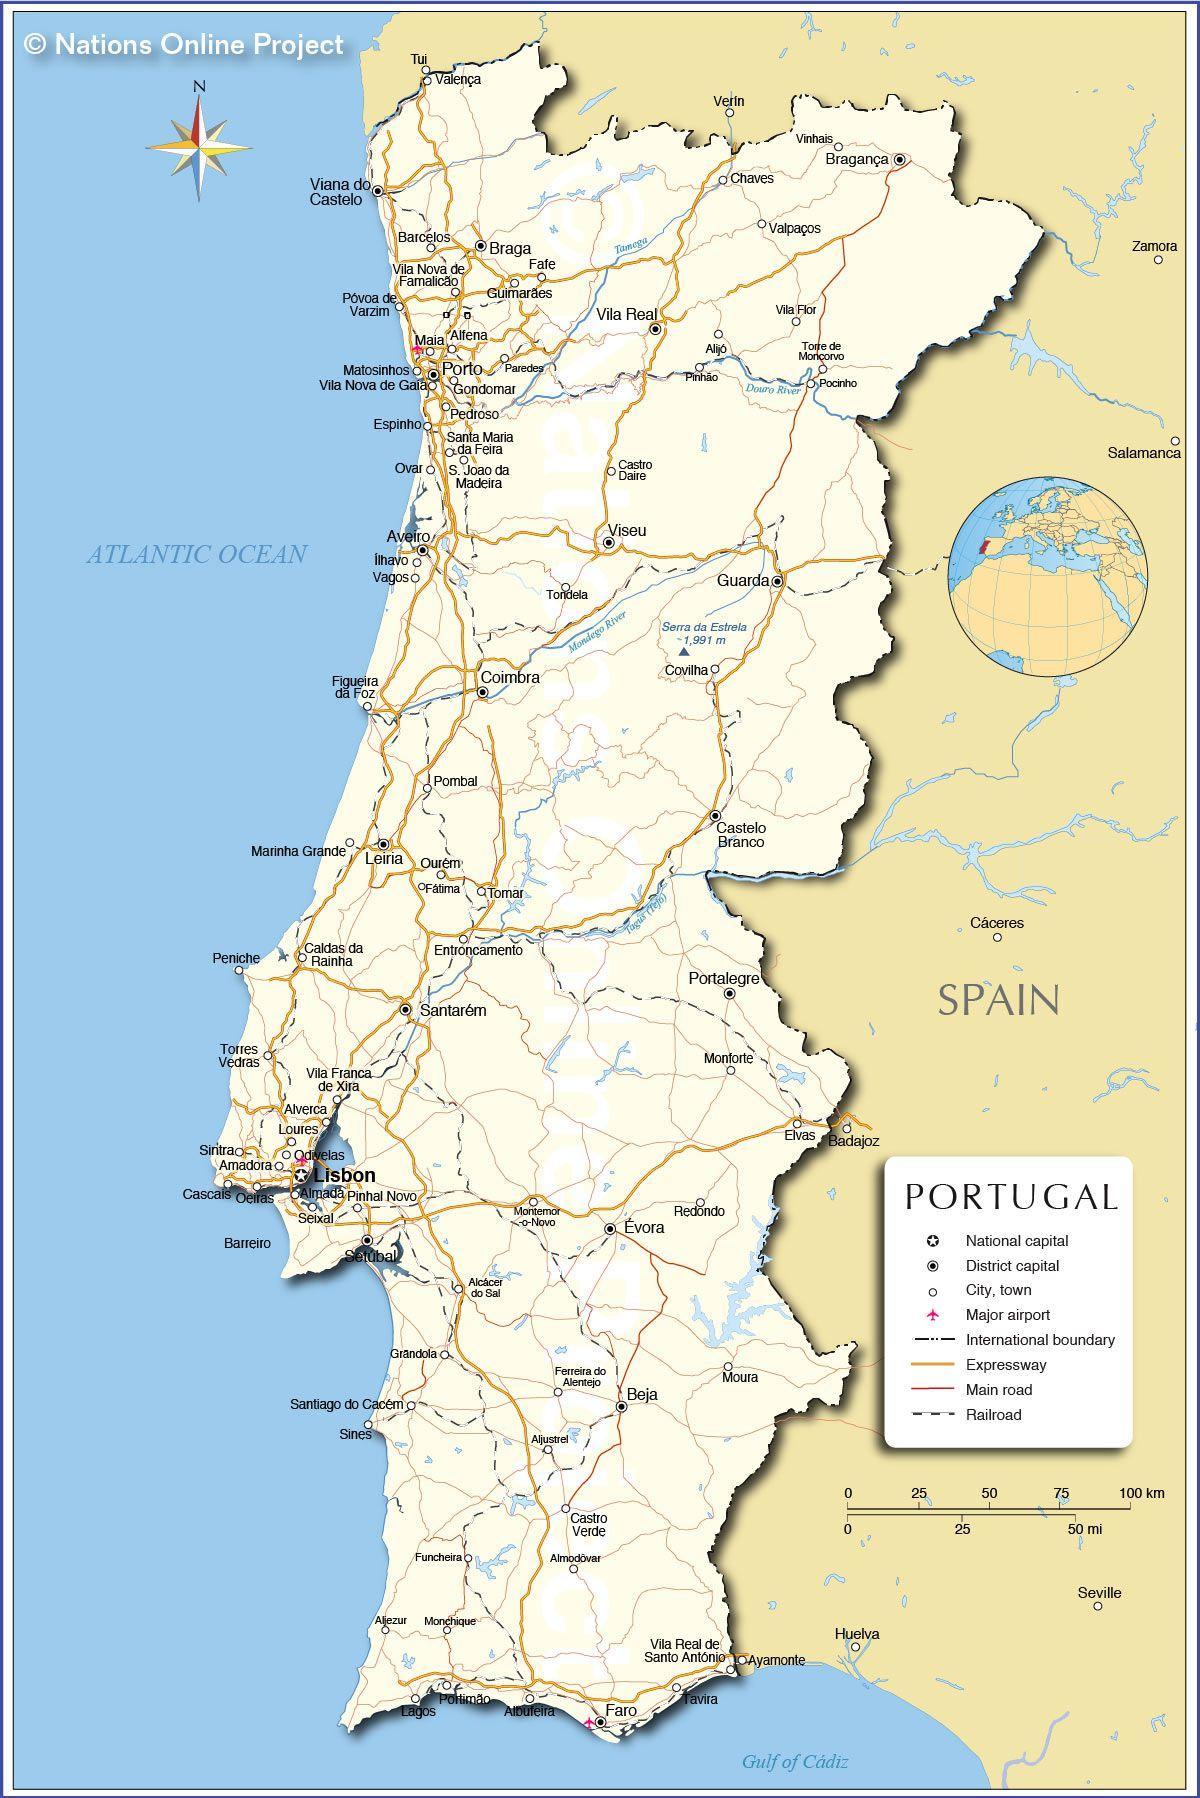 Portugal on a map